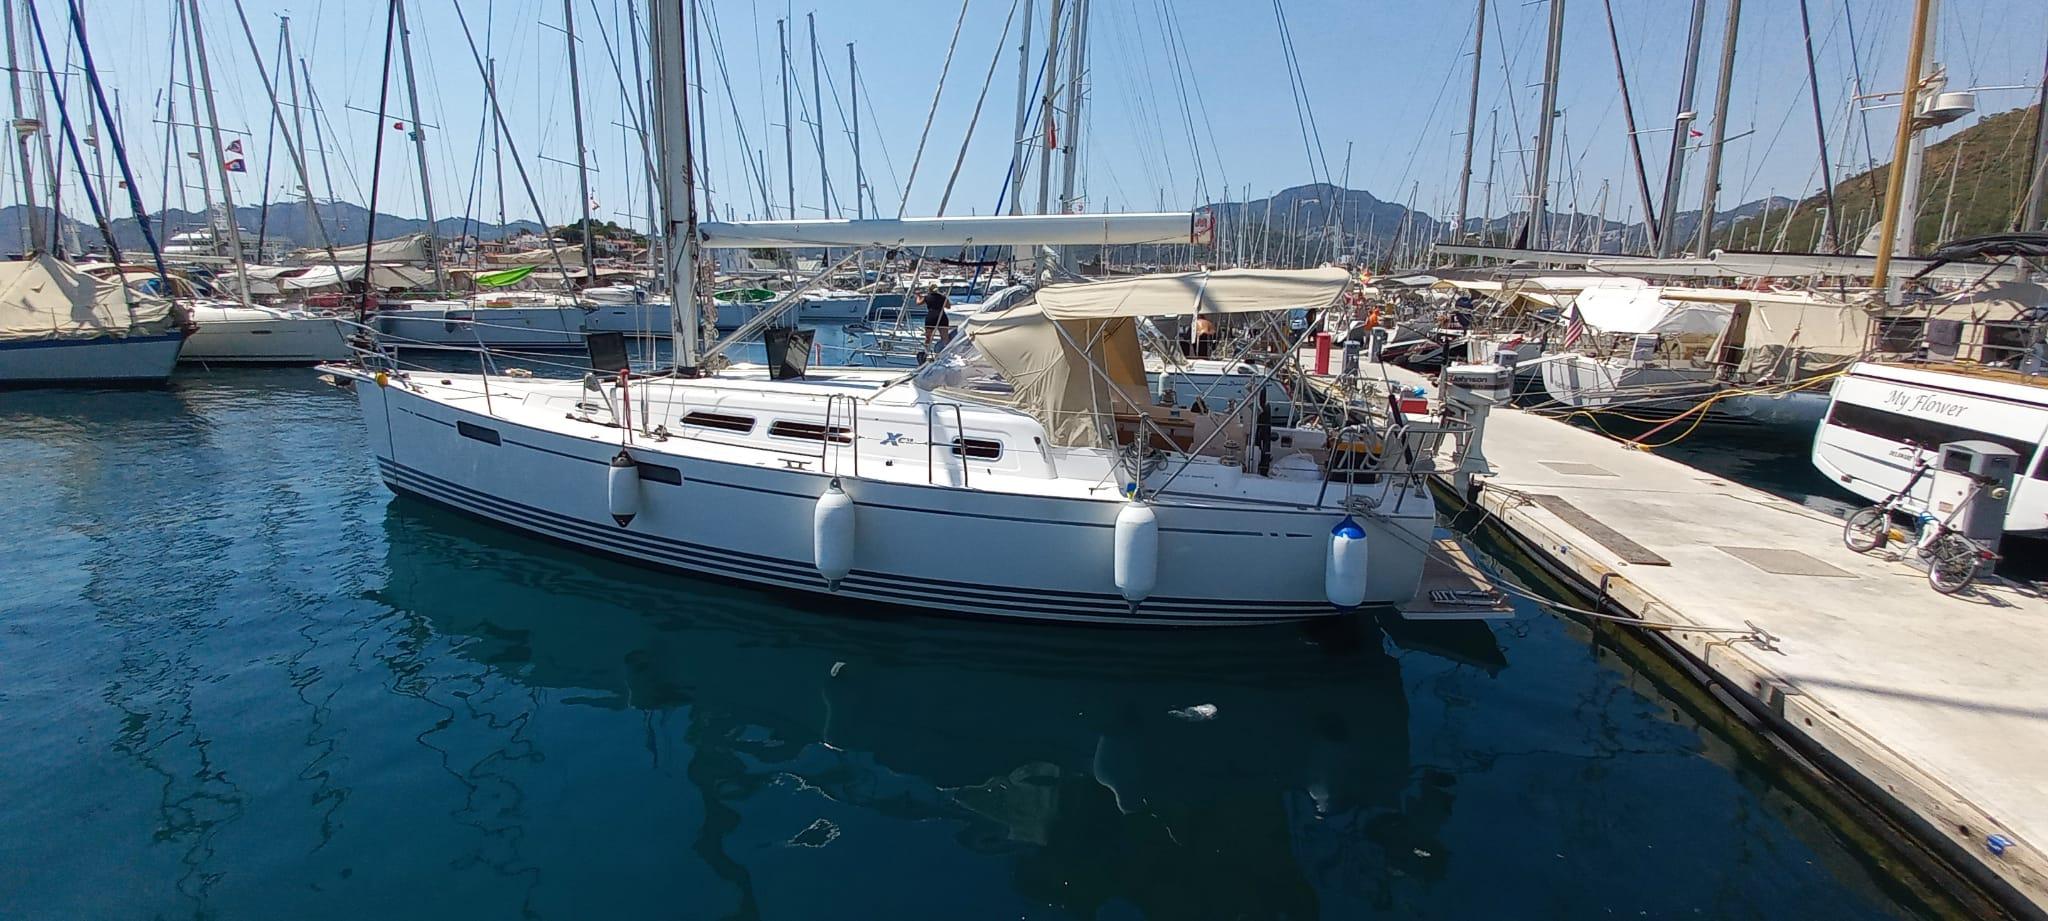 x yachts xc 38 for sale